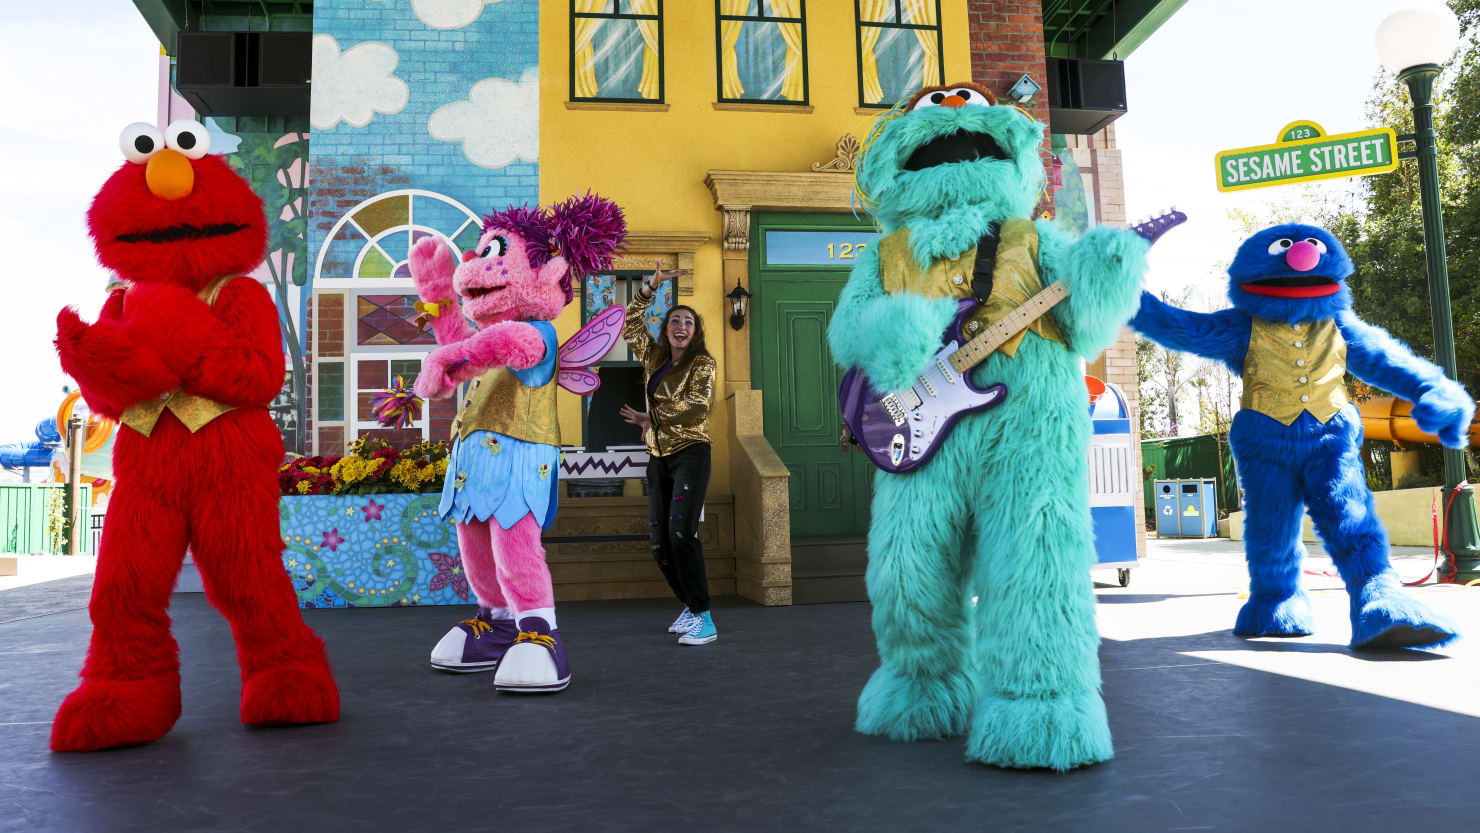 $25M Lawsuit Against Sesame Place Alleges Rampant Racial Discrimination – The Daily Beast